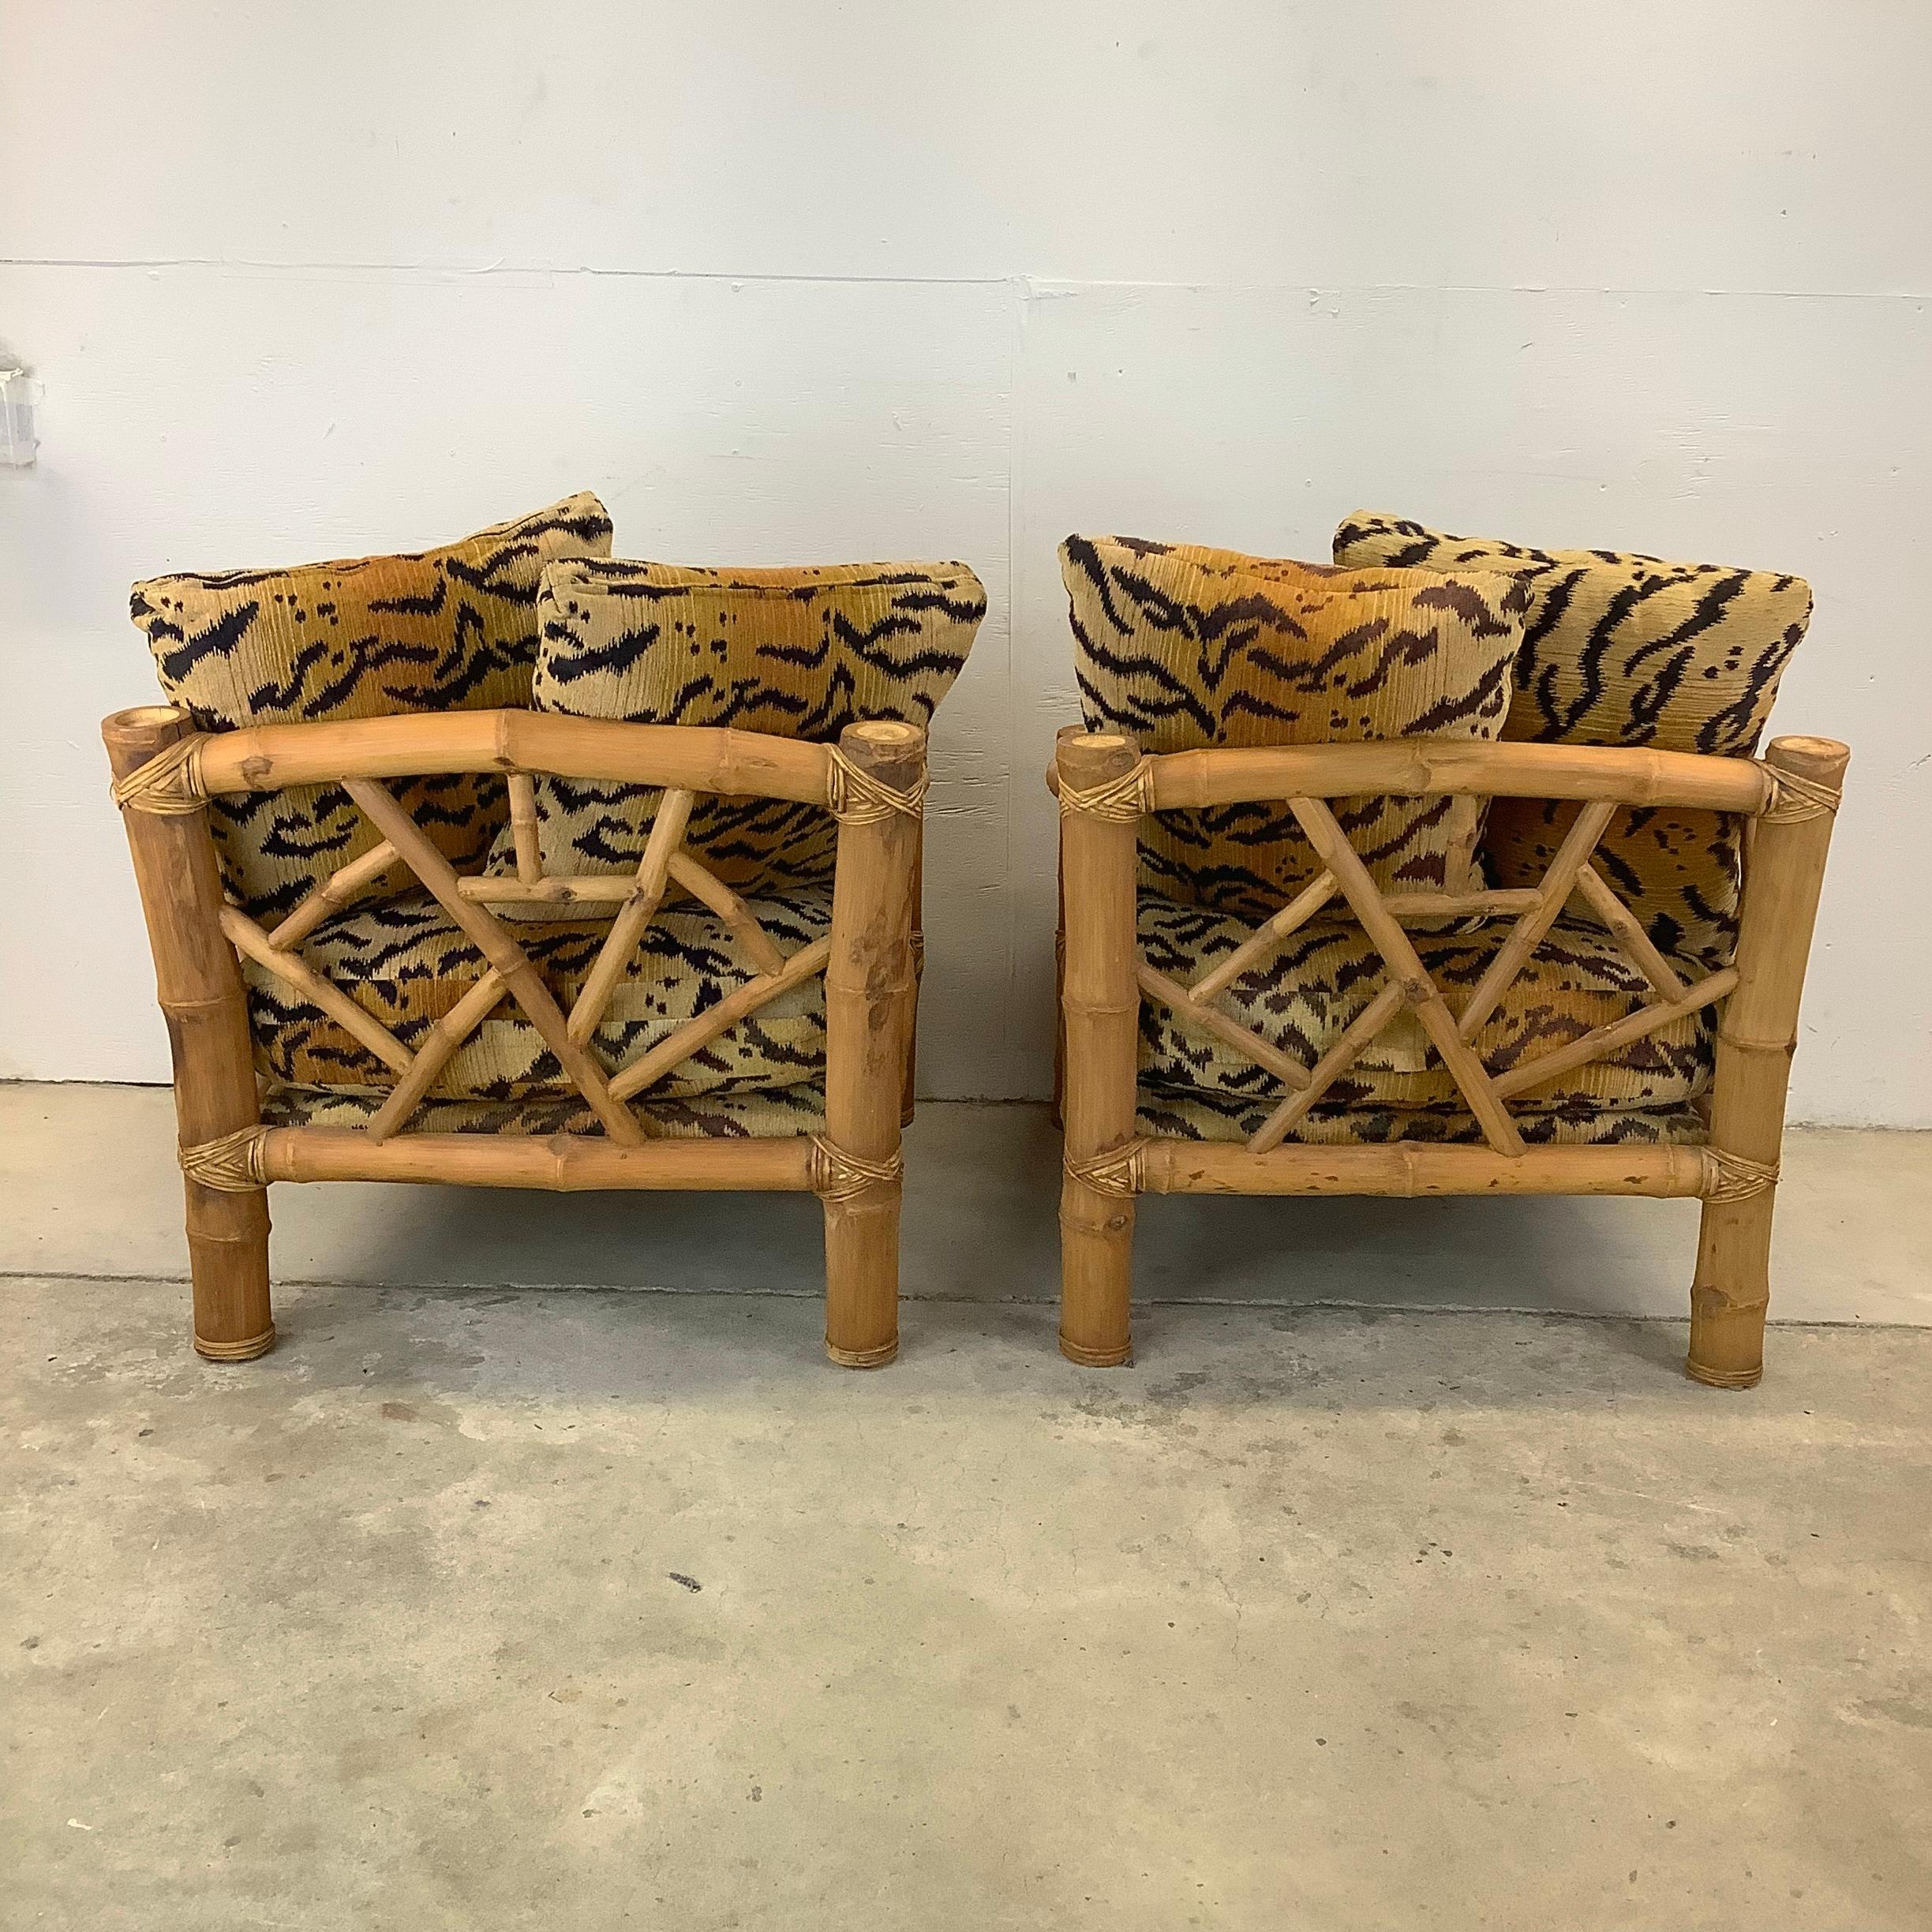 Pair Vintage Bamboo Armchairs & Ottoman in Tiger Print For Sale 2